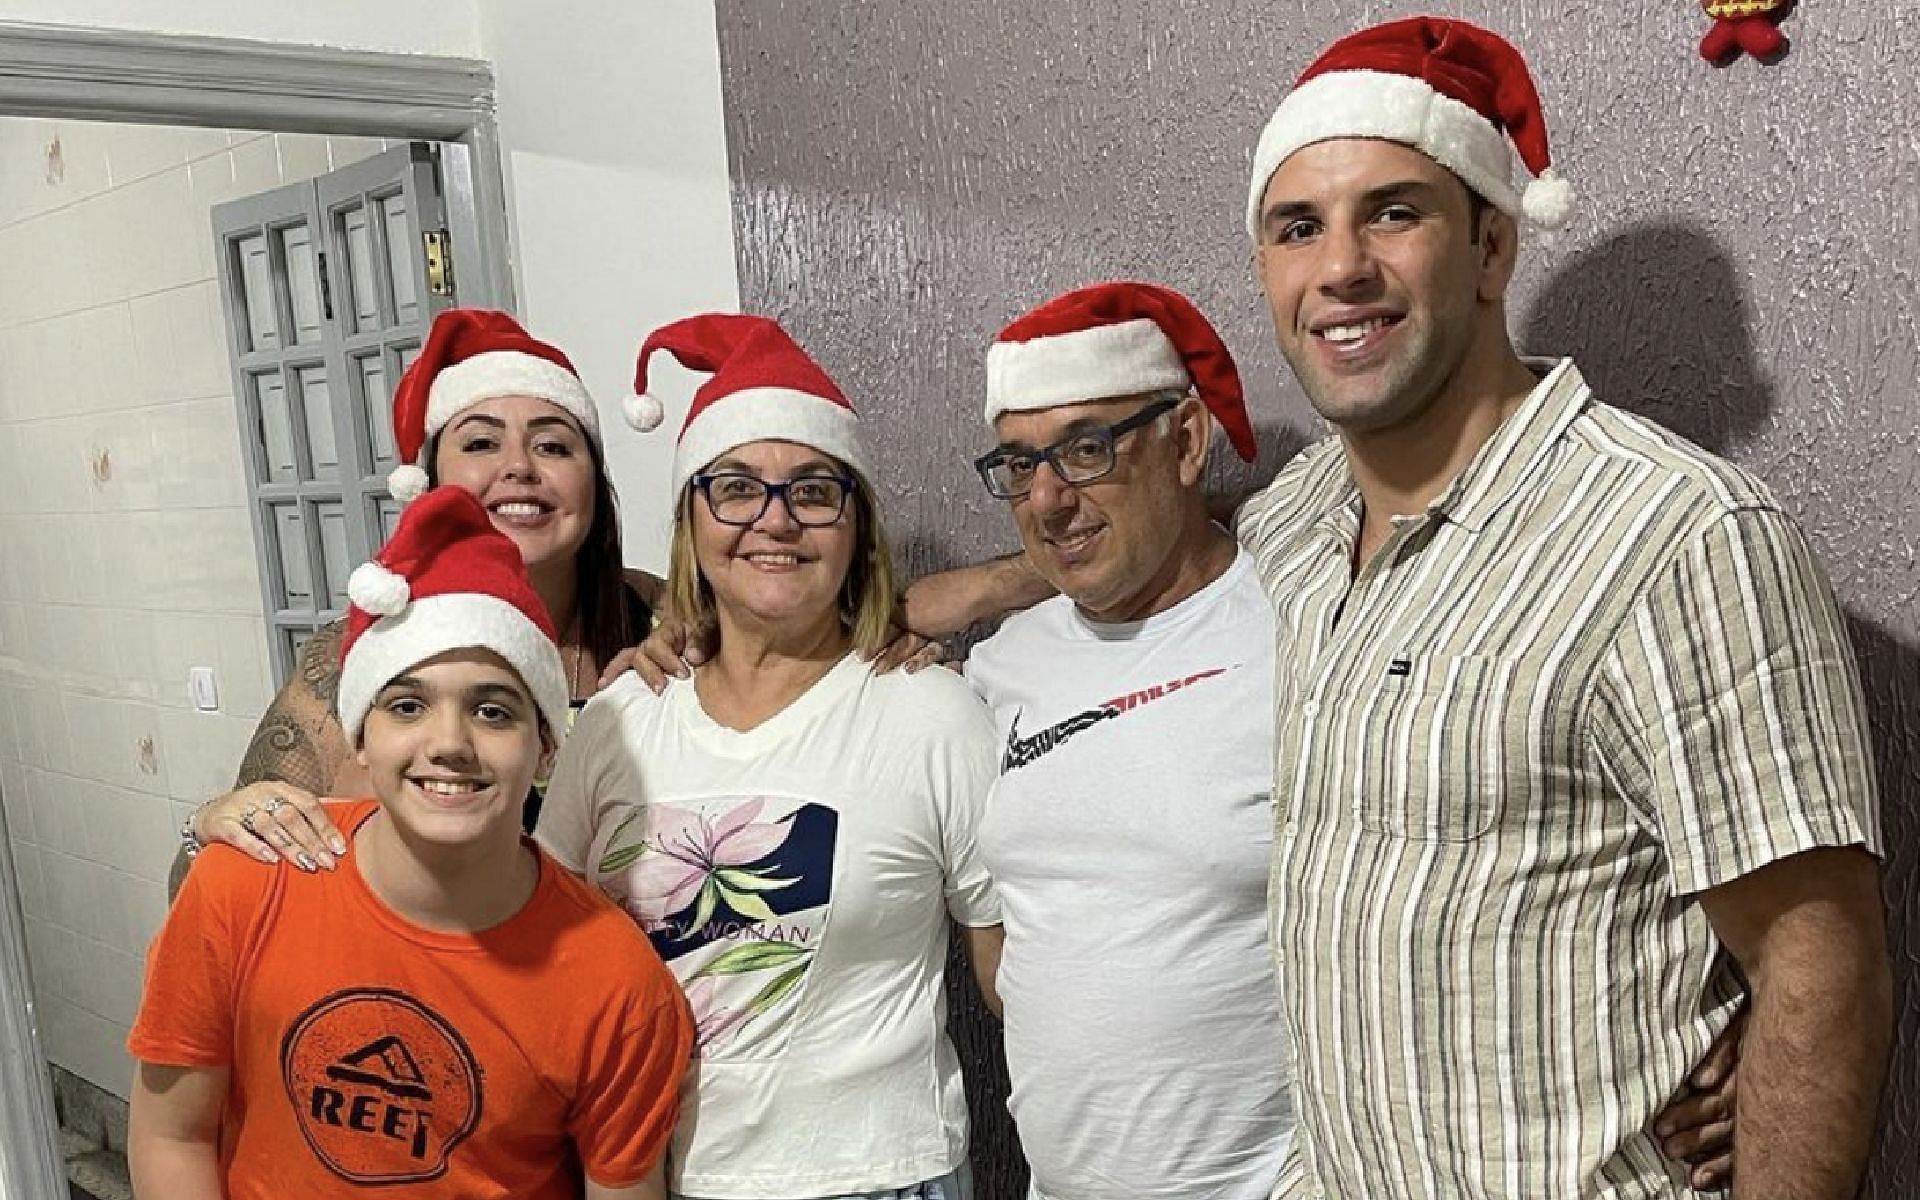 Marcus &#039;Buchecha&#039; Almeida (first from right) credits his father Clayton Ferreira (second from right) and mother Elisabete (middle) as his biggest inspirations. [Photo Marcus &#039;Buchecha&#039; Almeida Instagram]